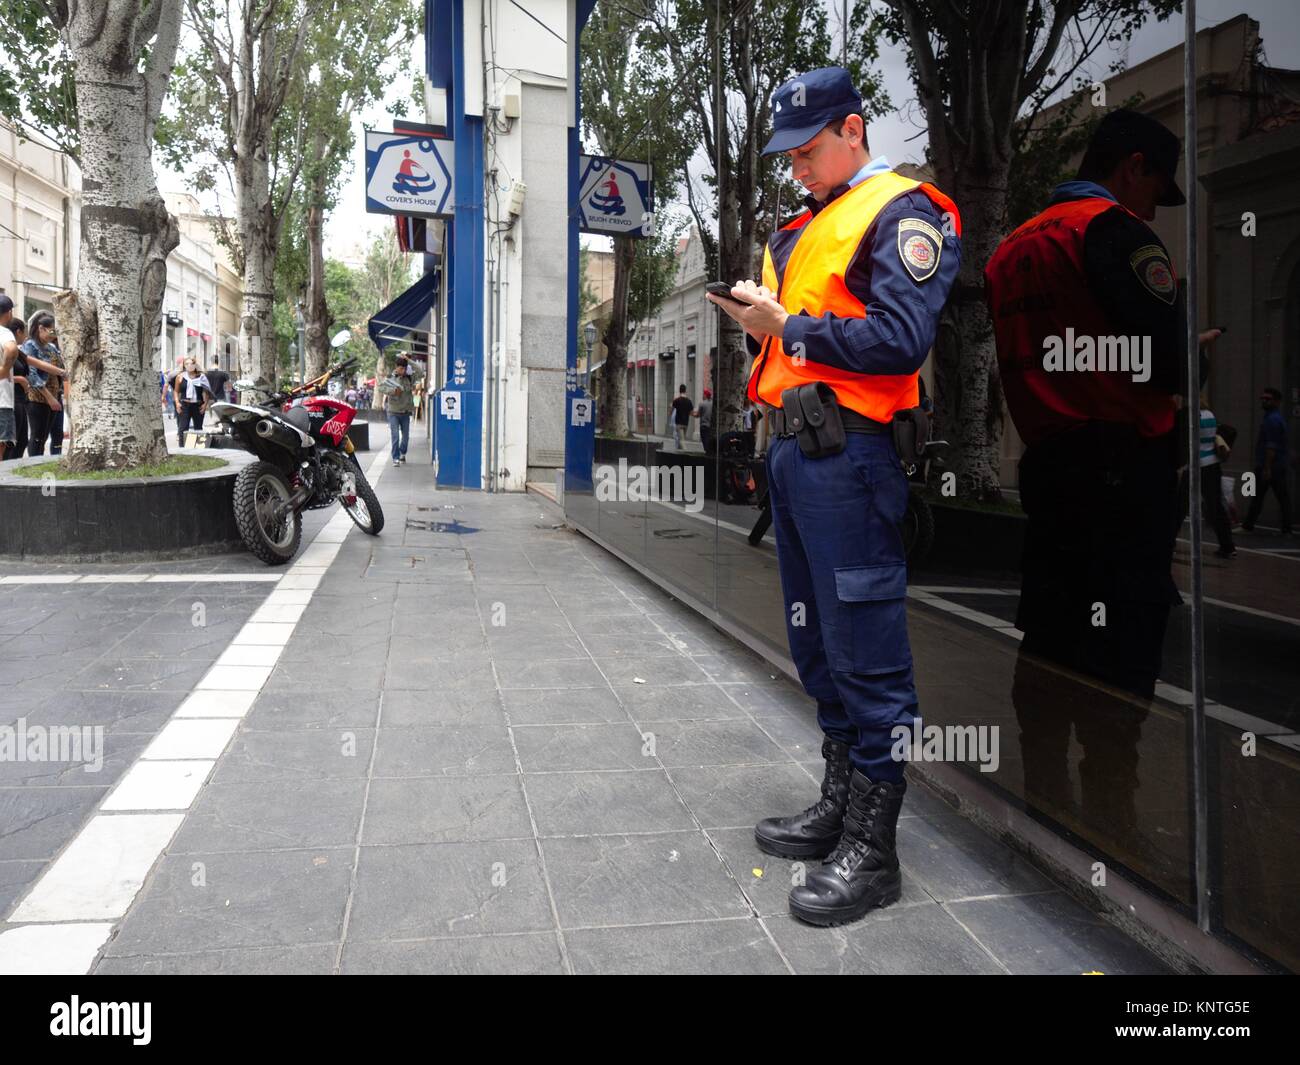 Cordoba, Argentina - 2017: An on duty police officer appears to be distracted on his cellular phone. Stock Photo